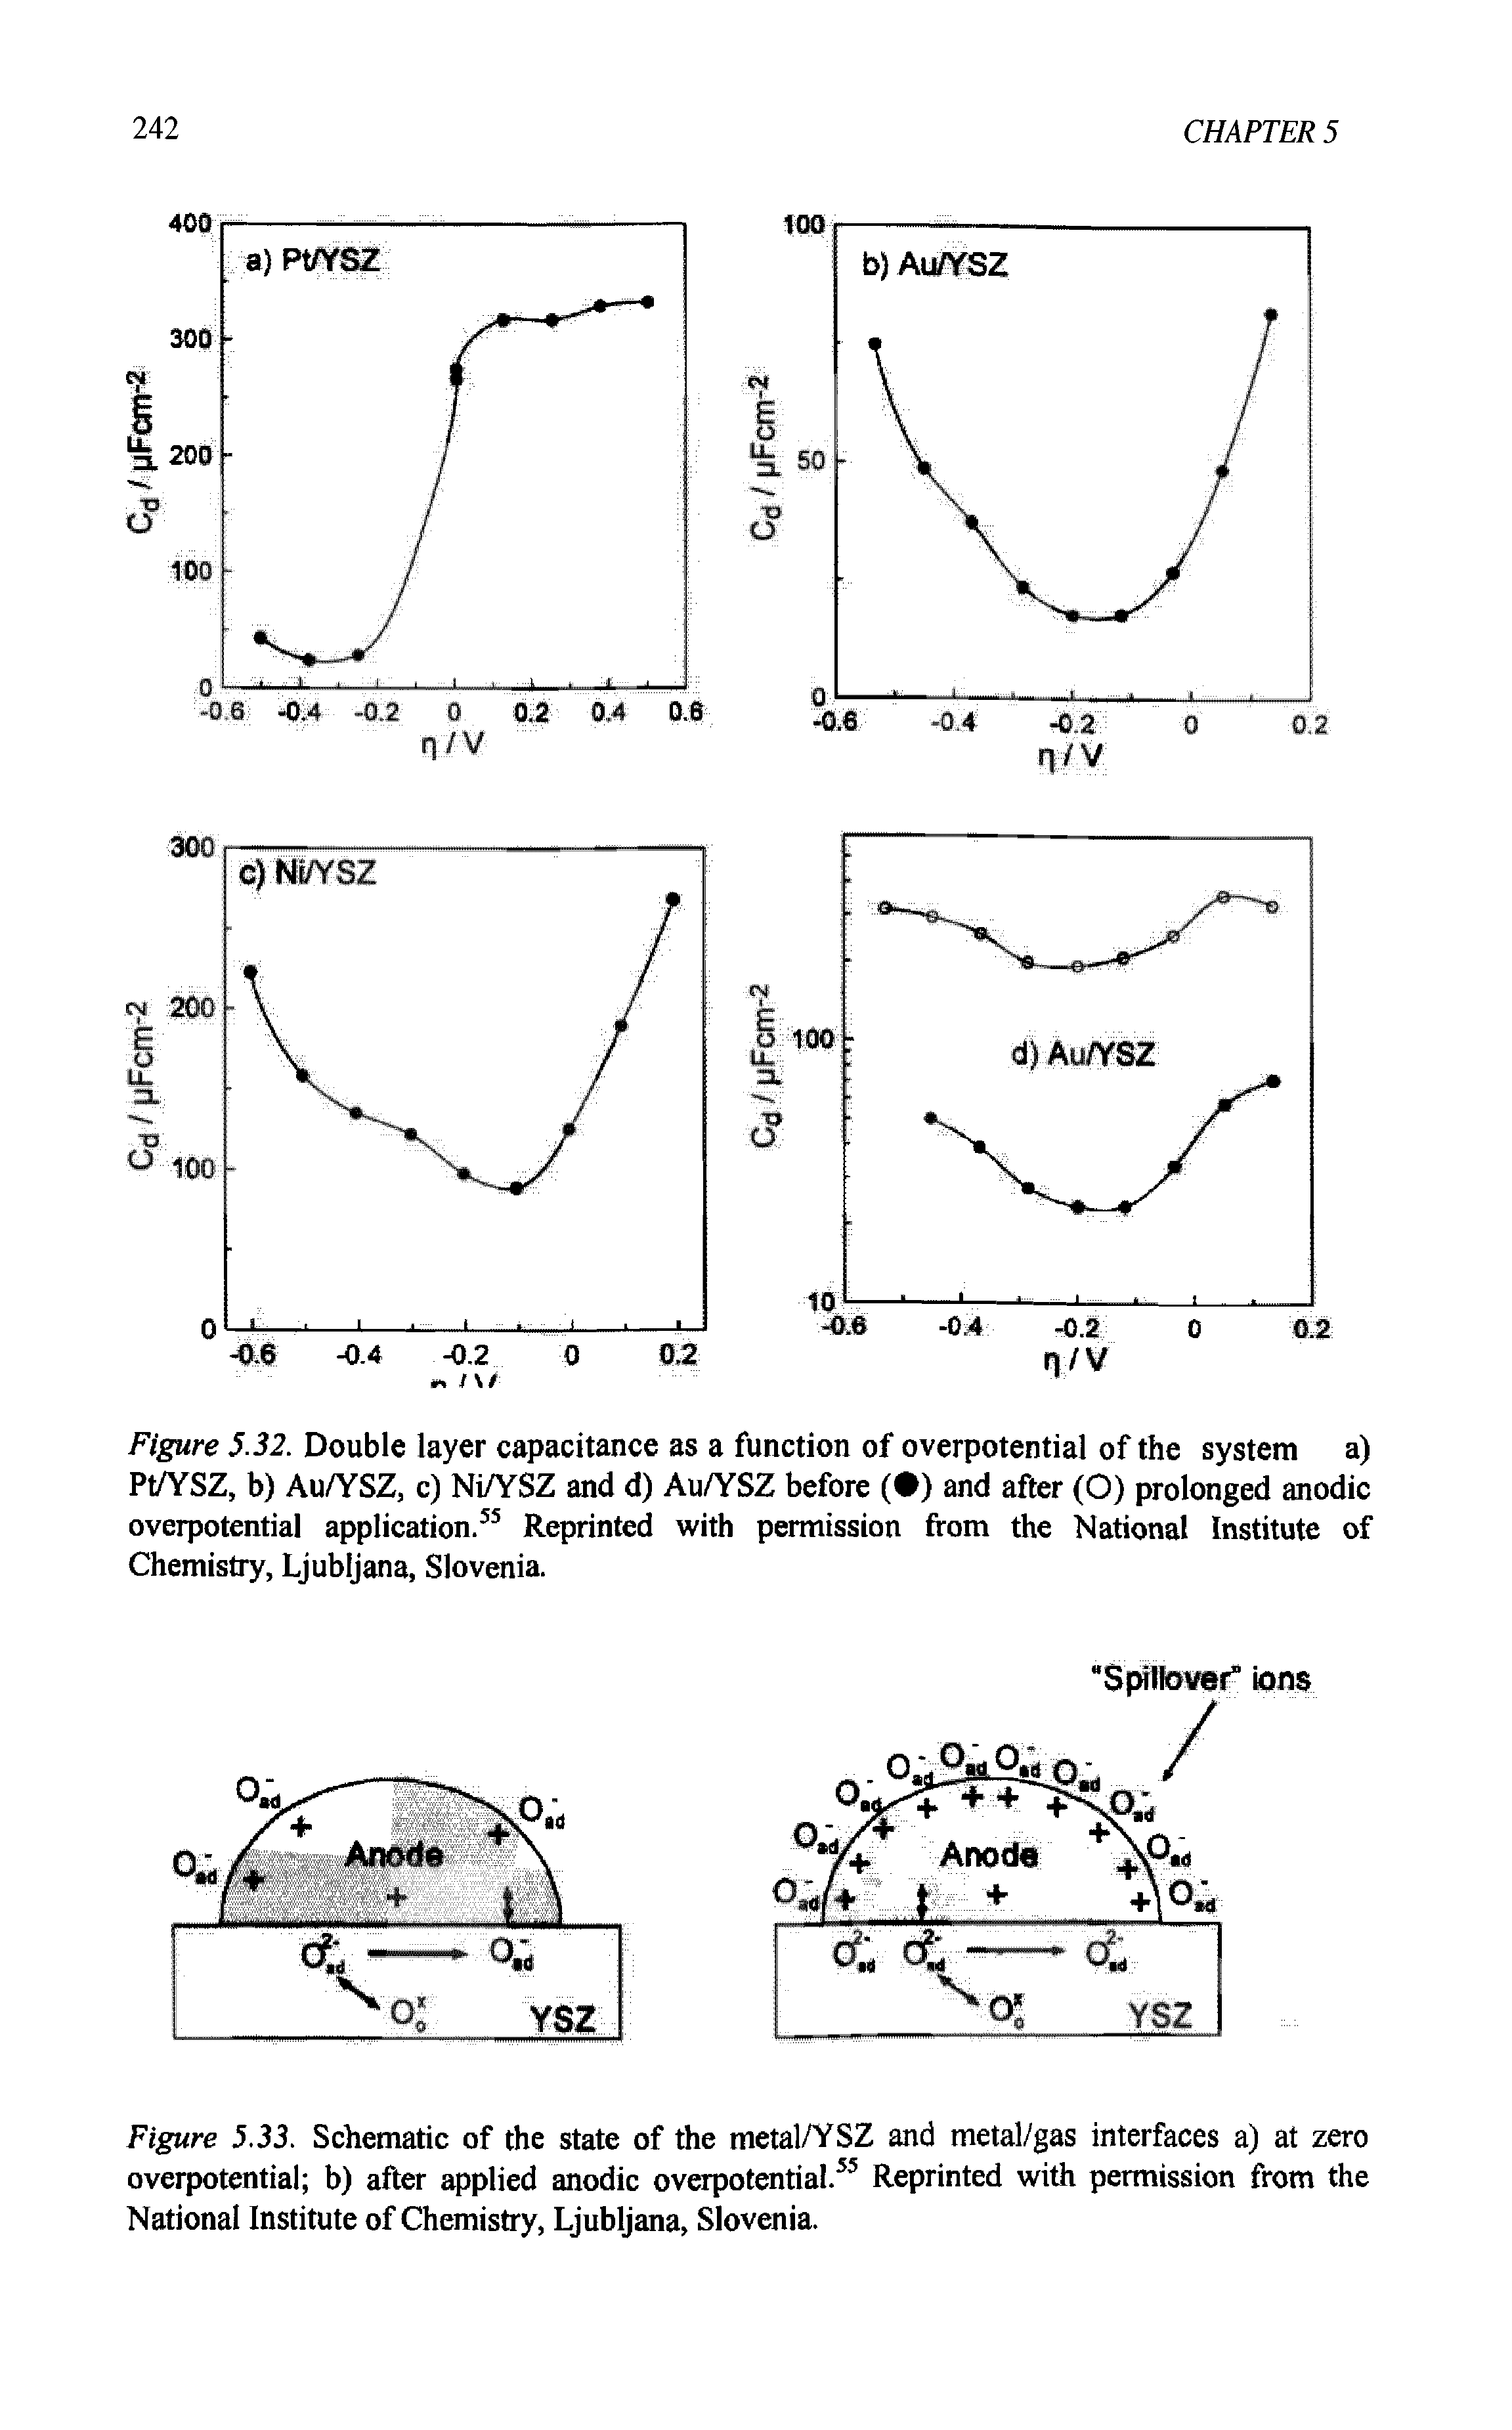 Figure 5.33. Schematic of the state of the metal/YSZ and metal/gas interfaces a) at zero overpotential b) after applied anodic overpotential.55 Reprinted with permission from the National Institute of Chemistry, Ljubljana, Slovenia.